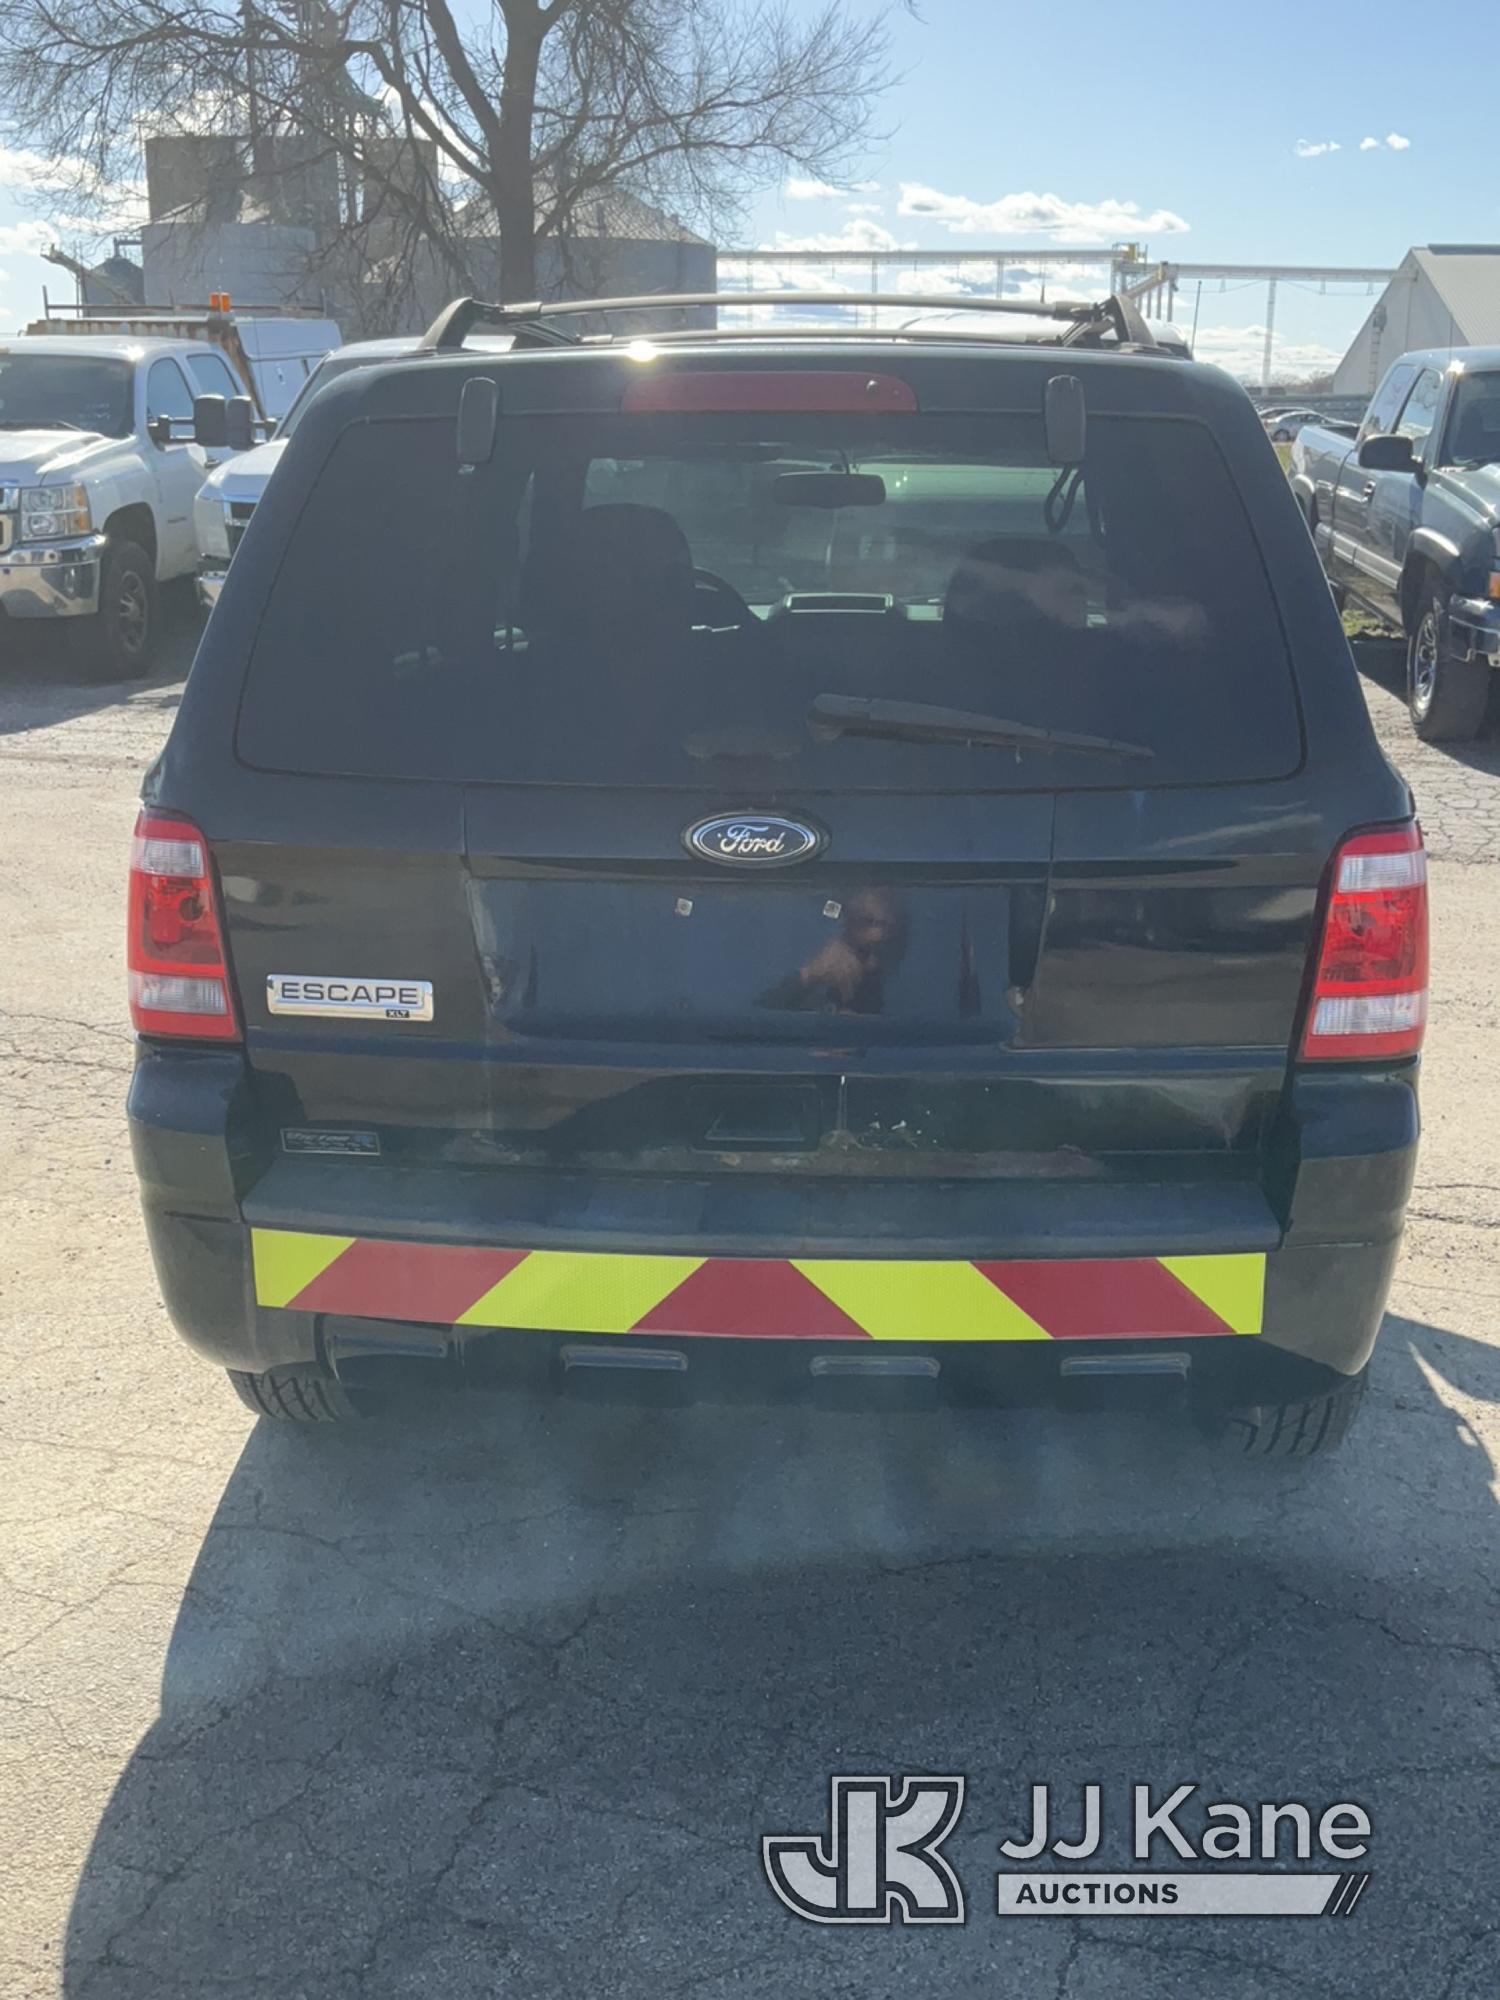 (South Beloit, IL) 2012 Ford Escape AWD Sport Utility Vehicle Runs & Moves) (Jump to Start-Needs Bat